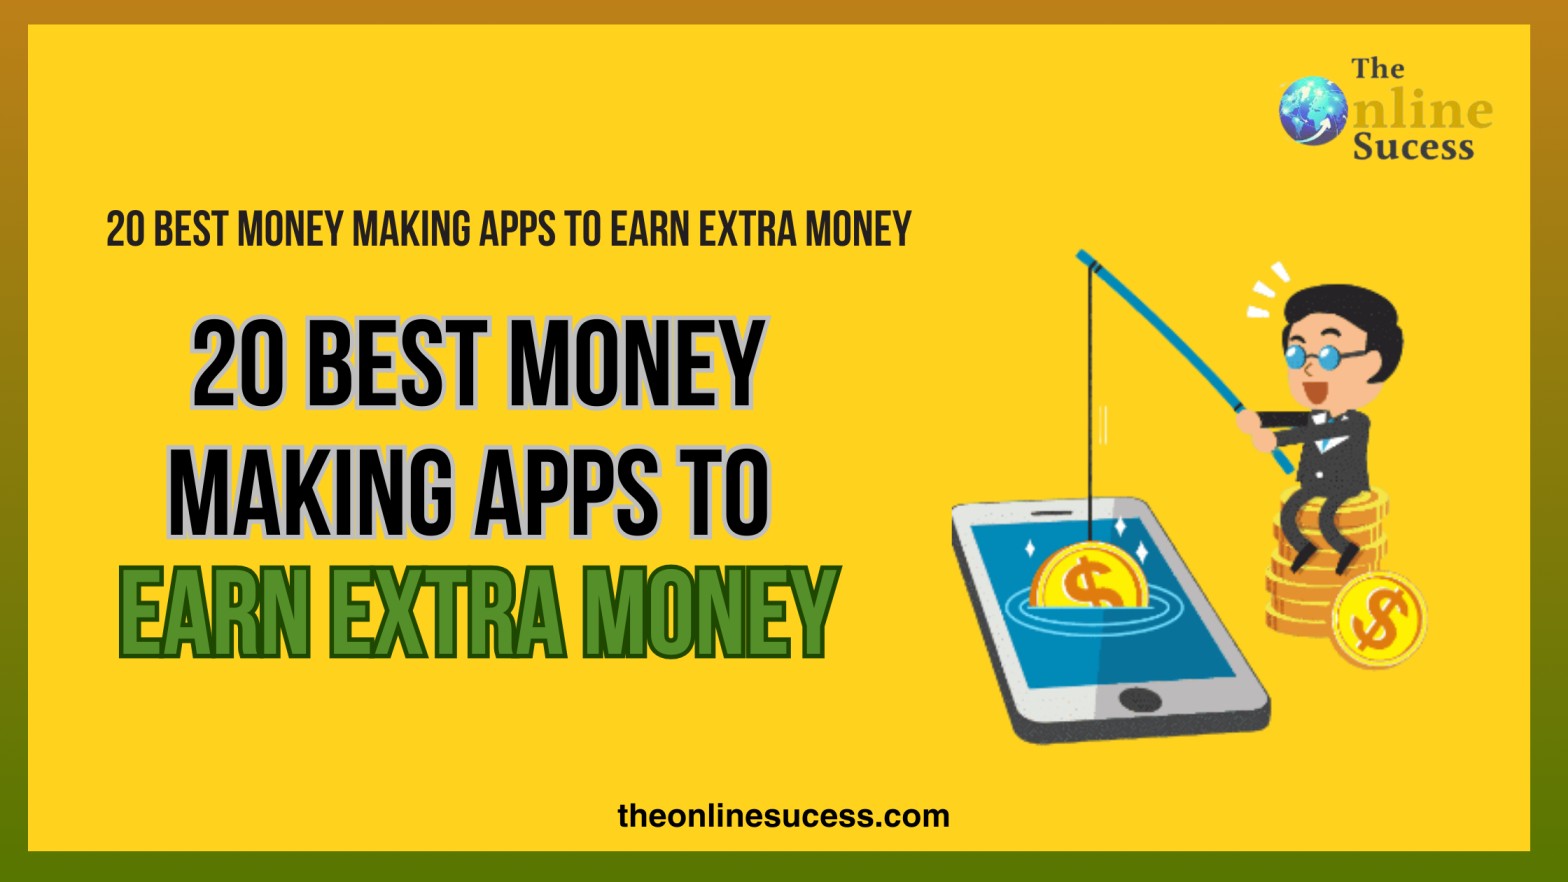 20 Best Money Making Apps To Earn Extra Money